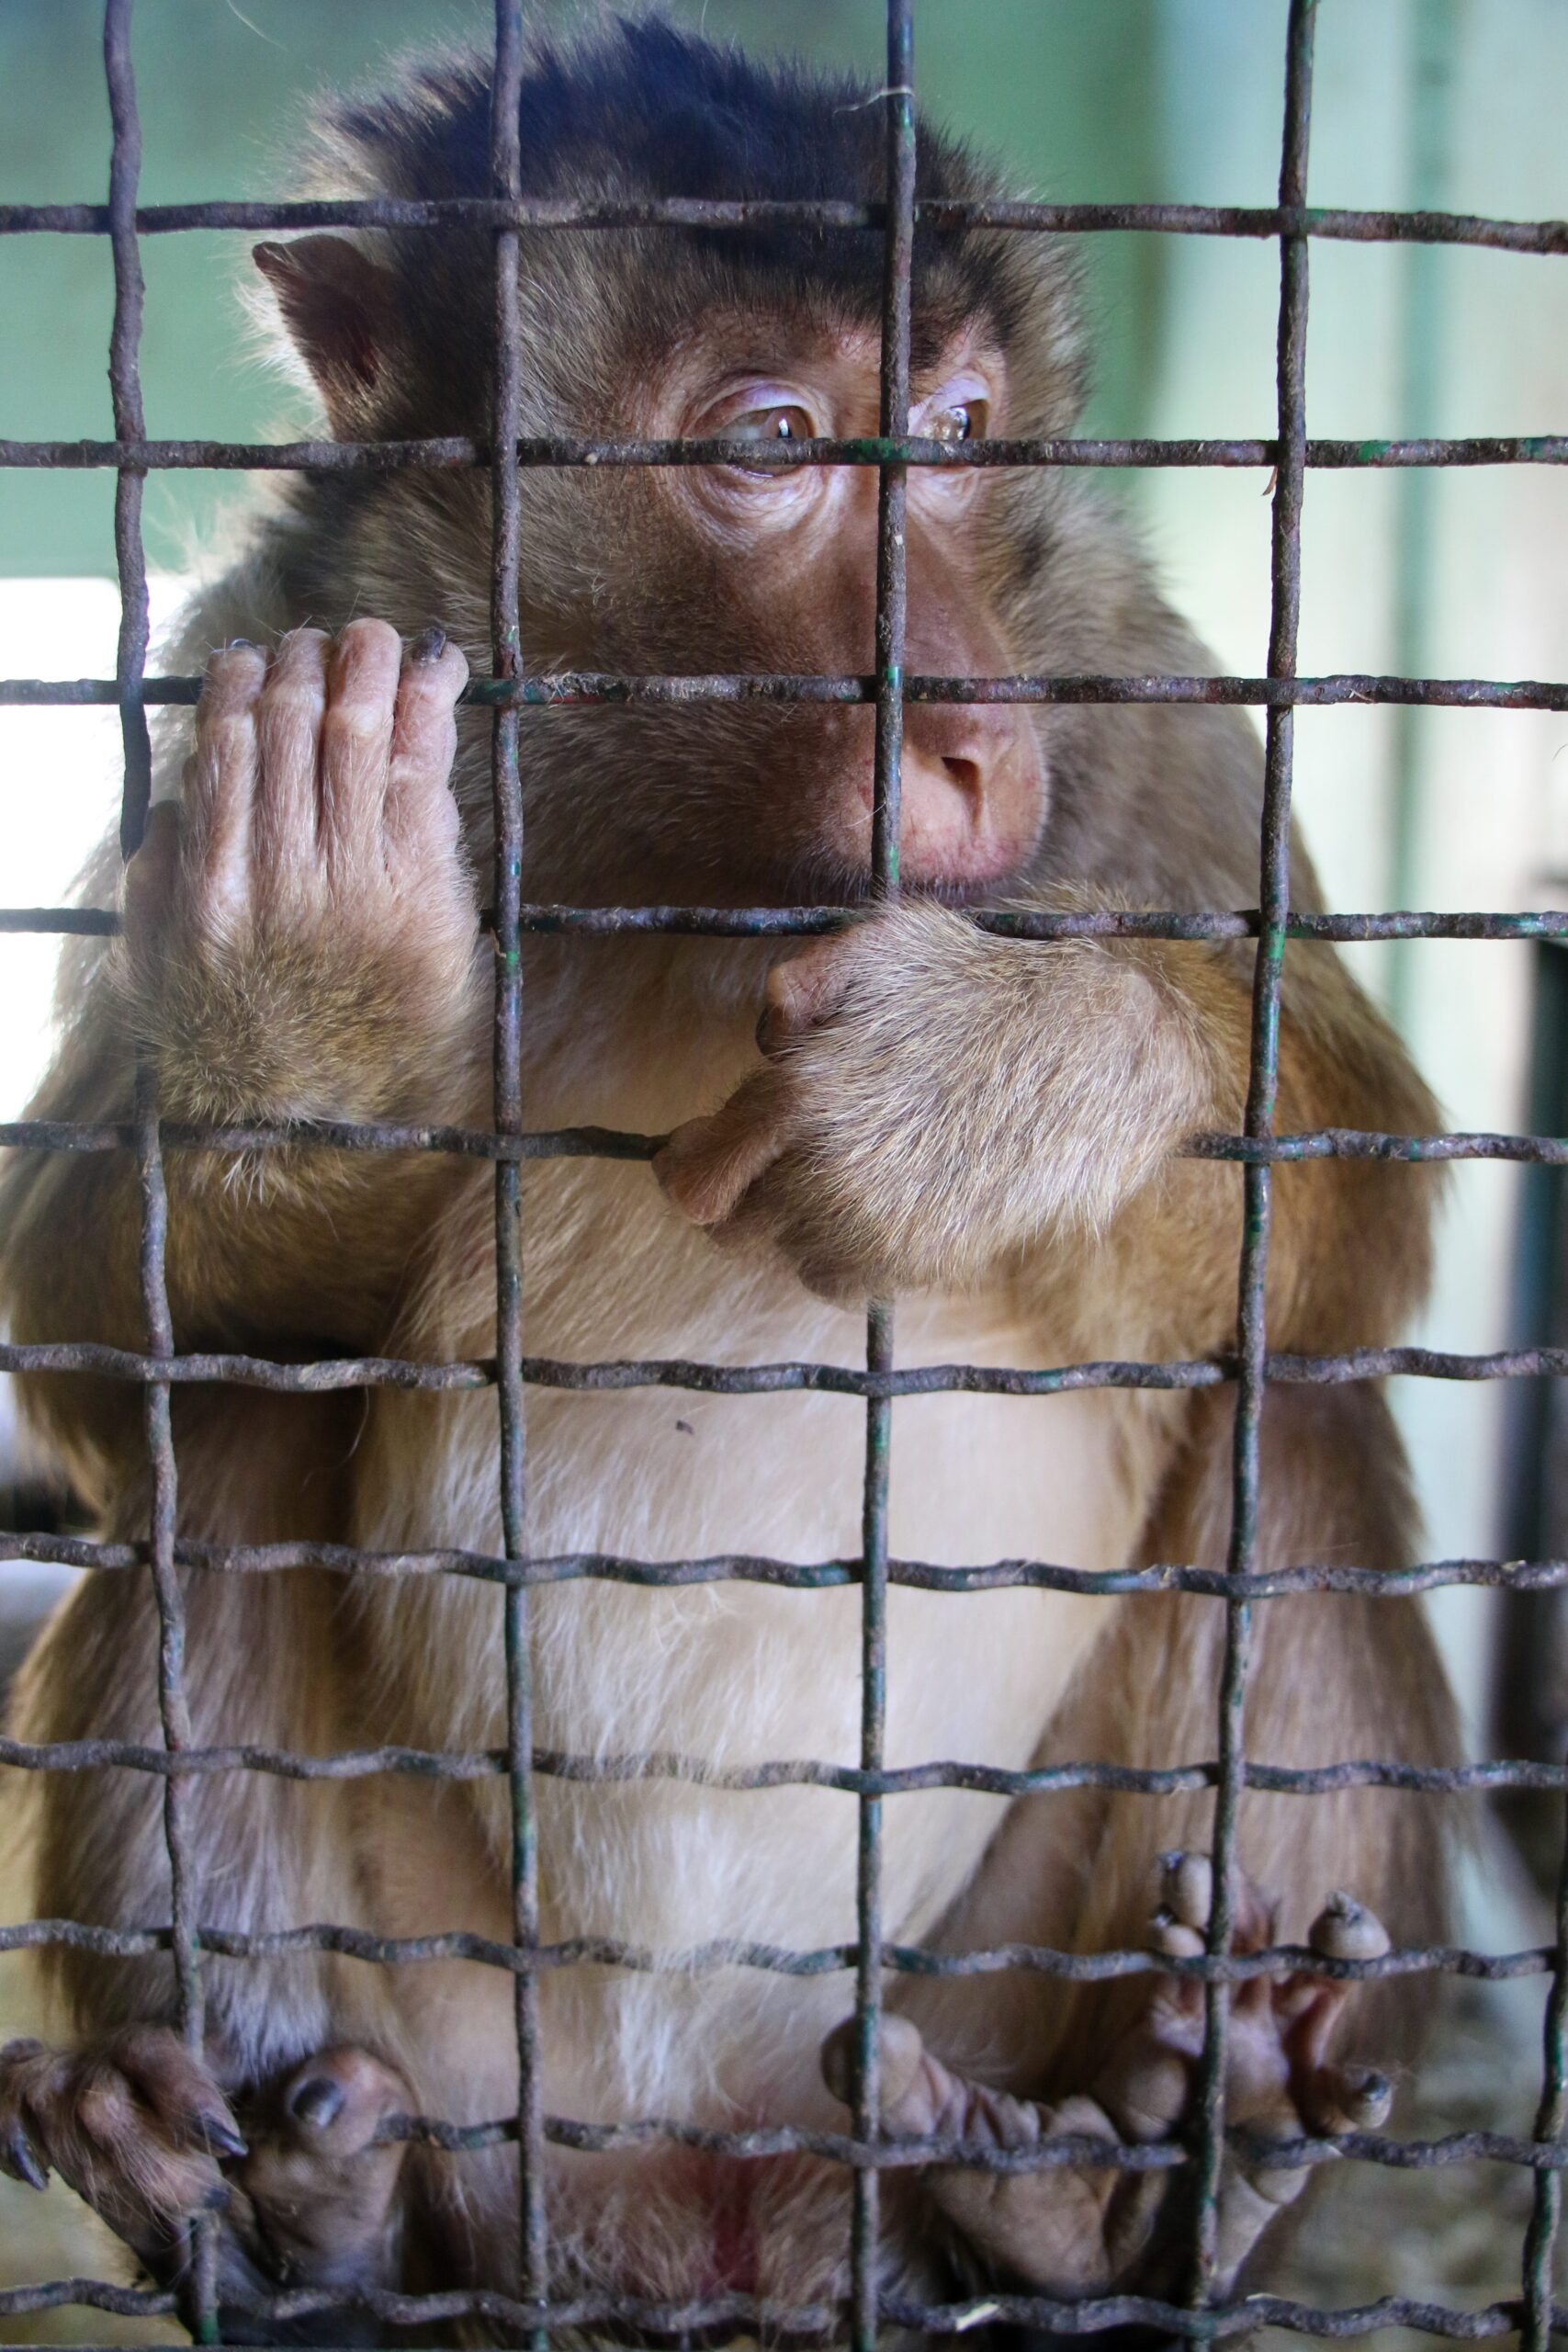 Is it time to end biomedical experiments on monkeys? - Scienceline